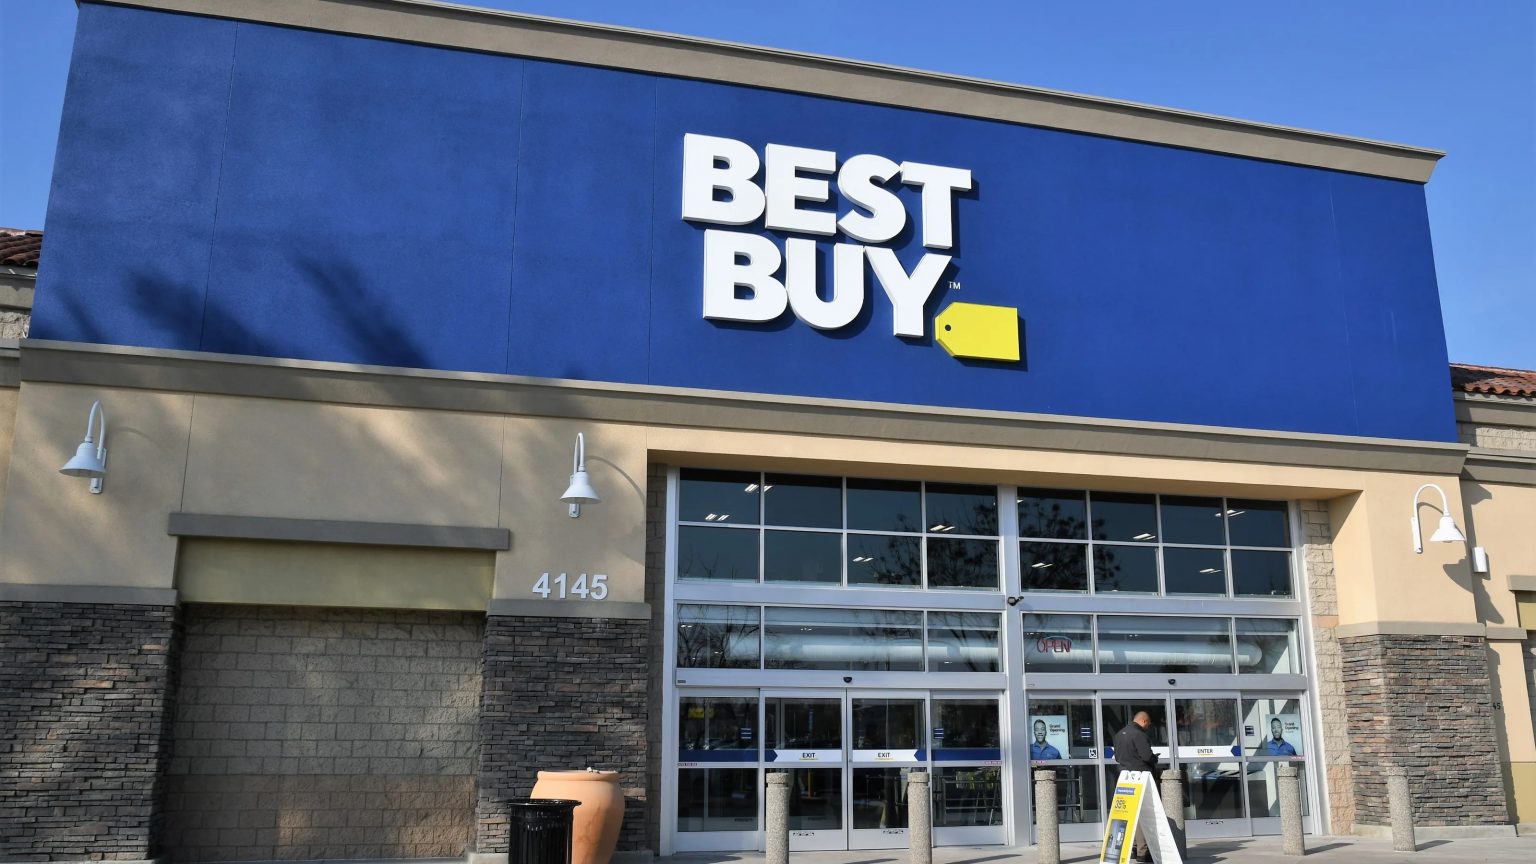 Best Buy Holiday Hours 2022 Is Best Buy Open on Labor Day?